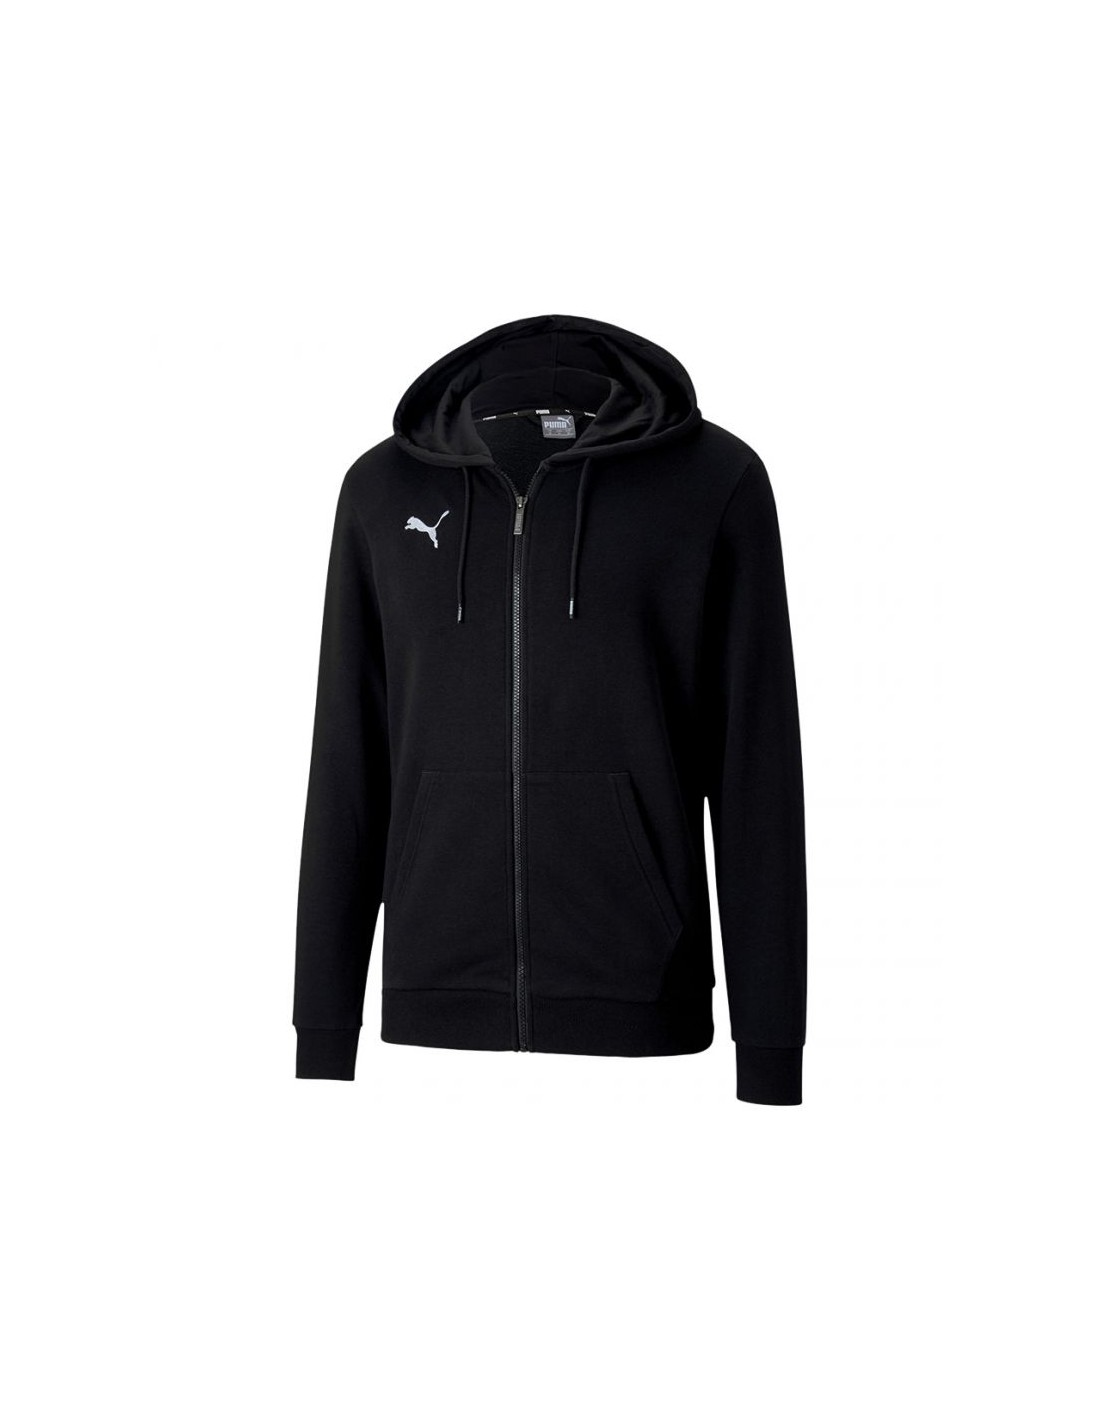 Puma teamGoal 23 Causals Hooded Jacked M 656708 03